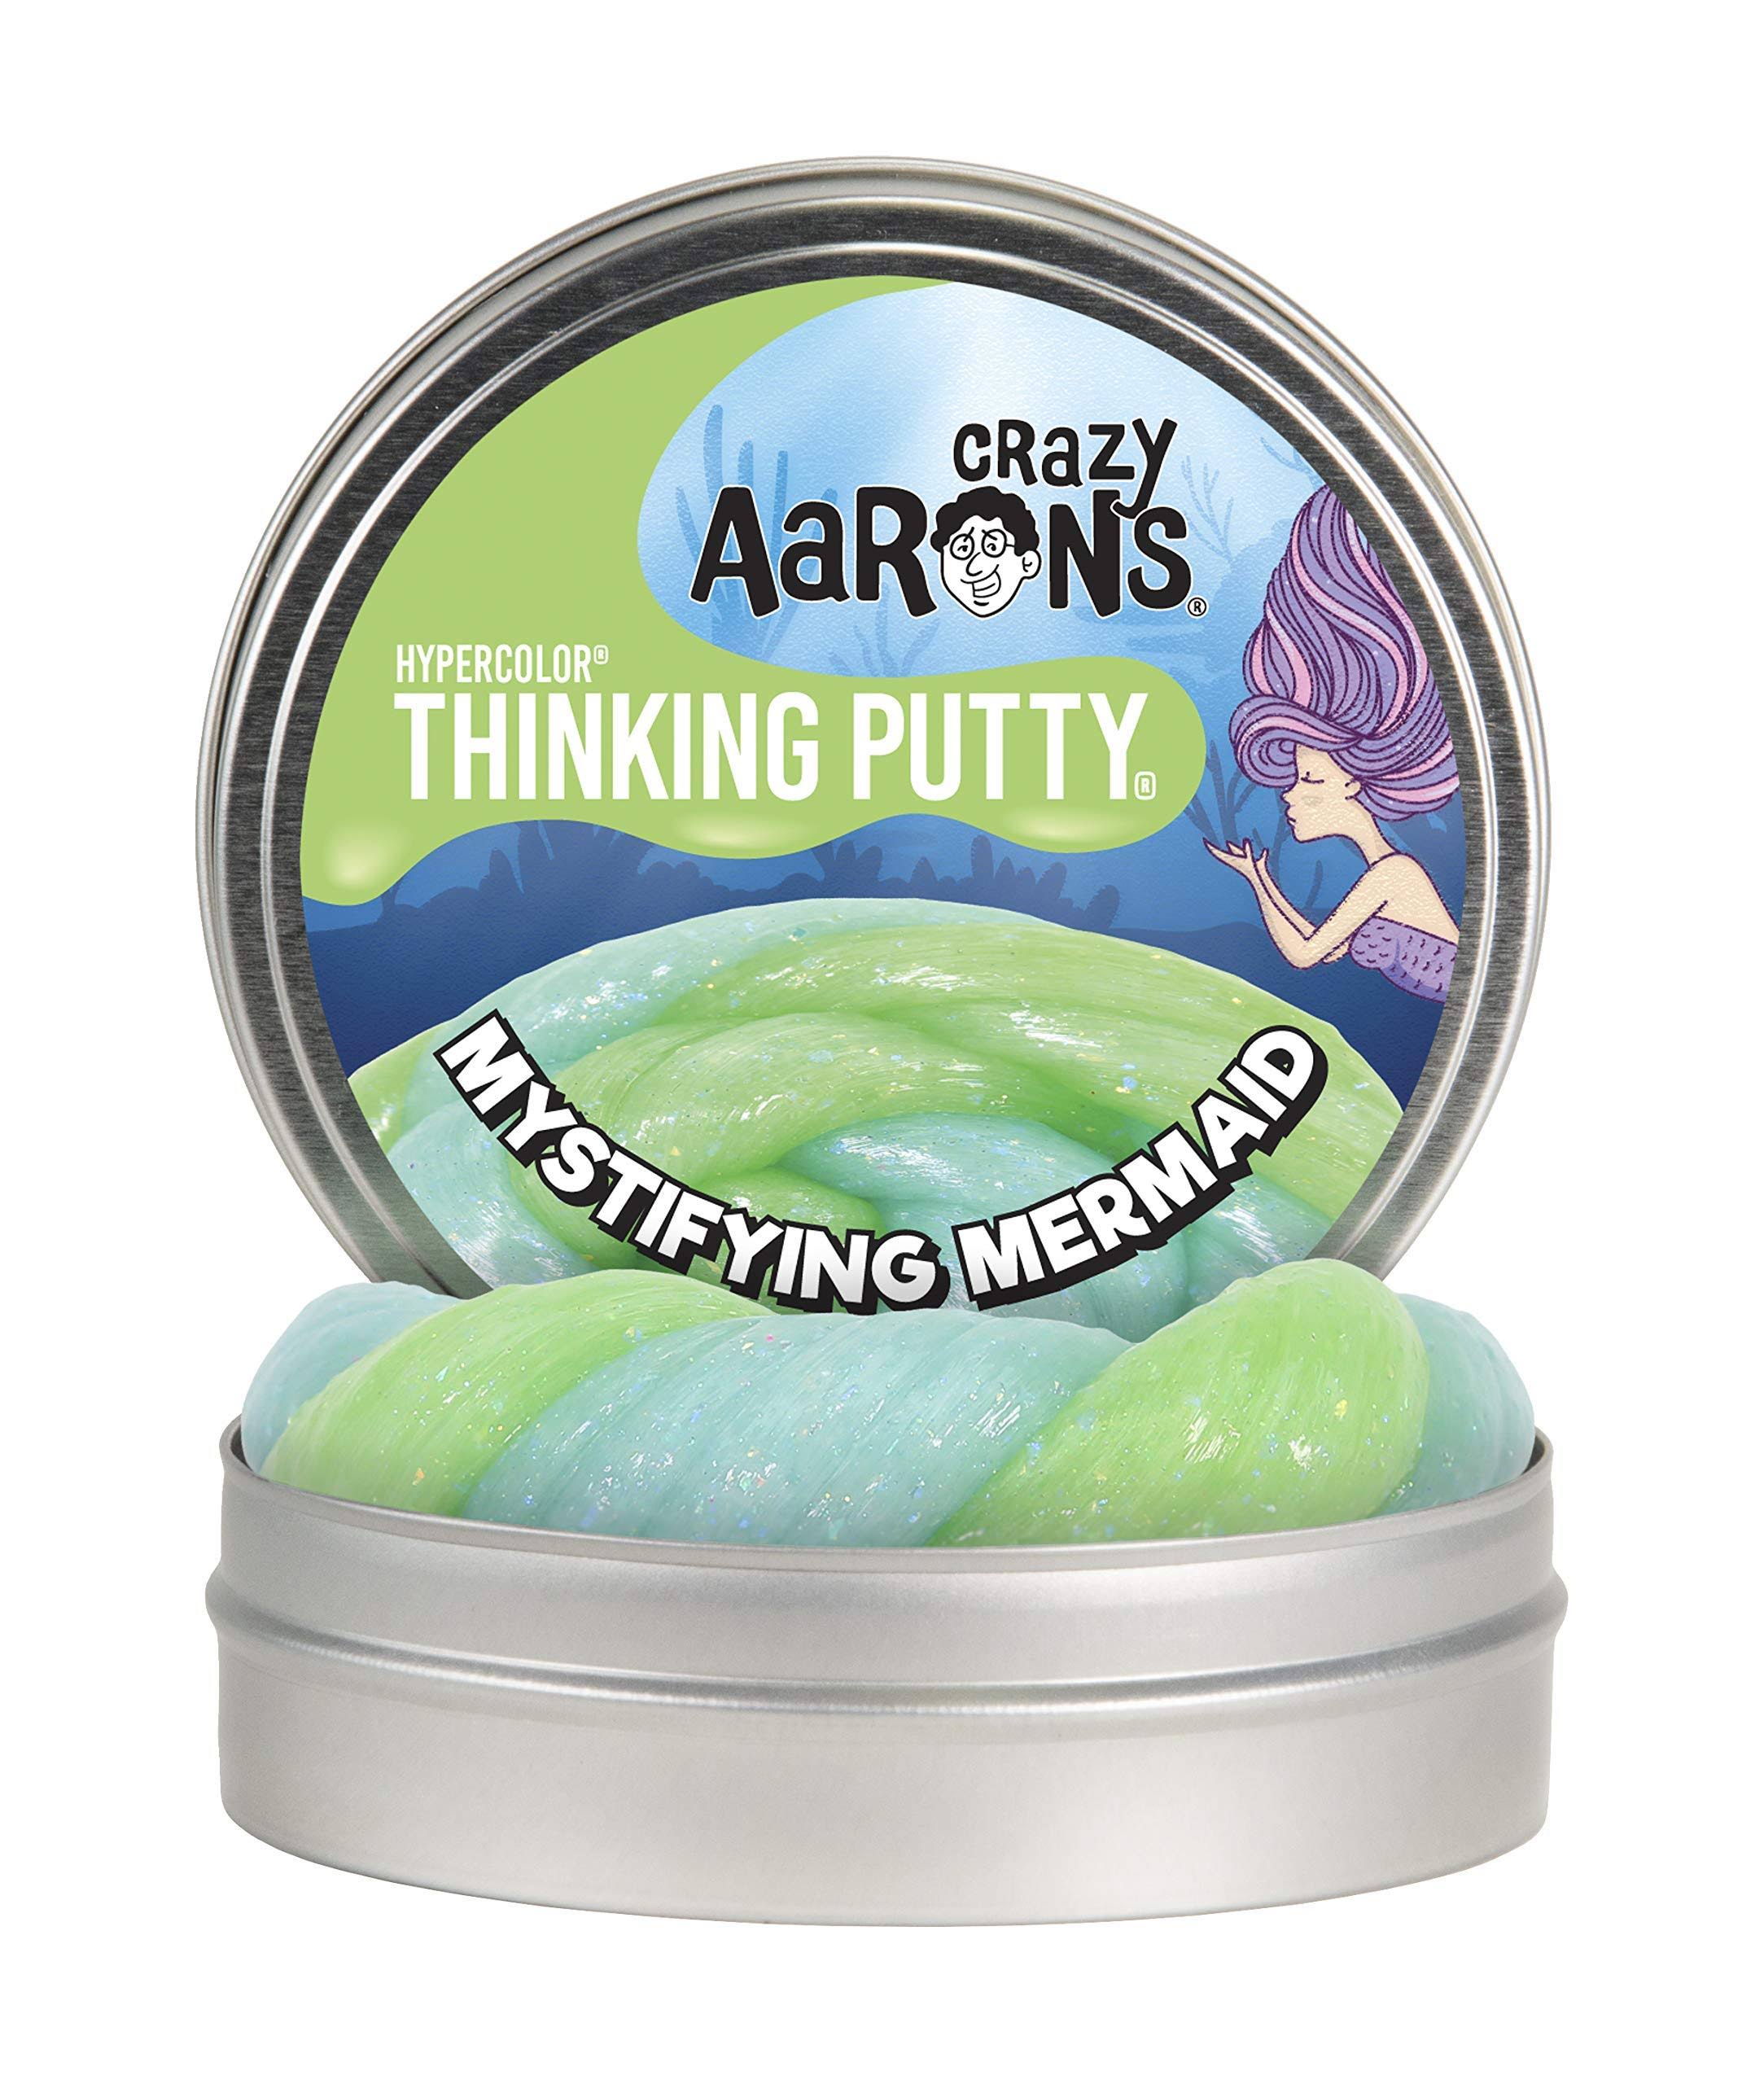 Crazy Aaron's Hypercolor Thinking Putty - Mystifying Mermaid